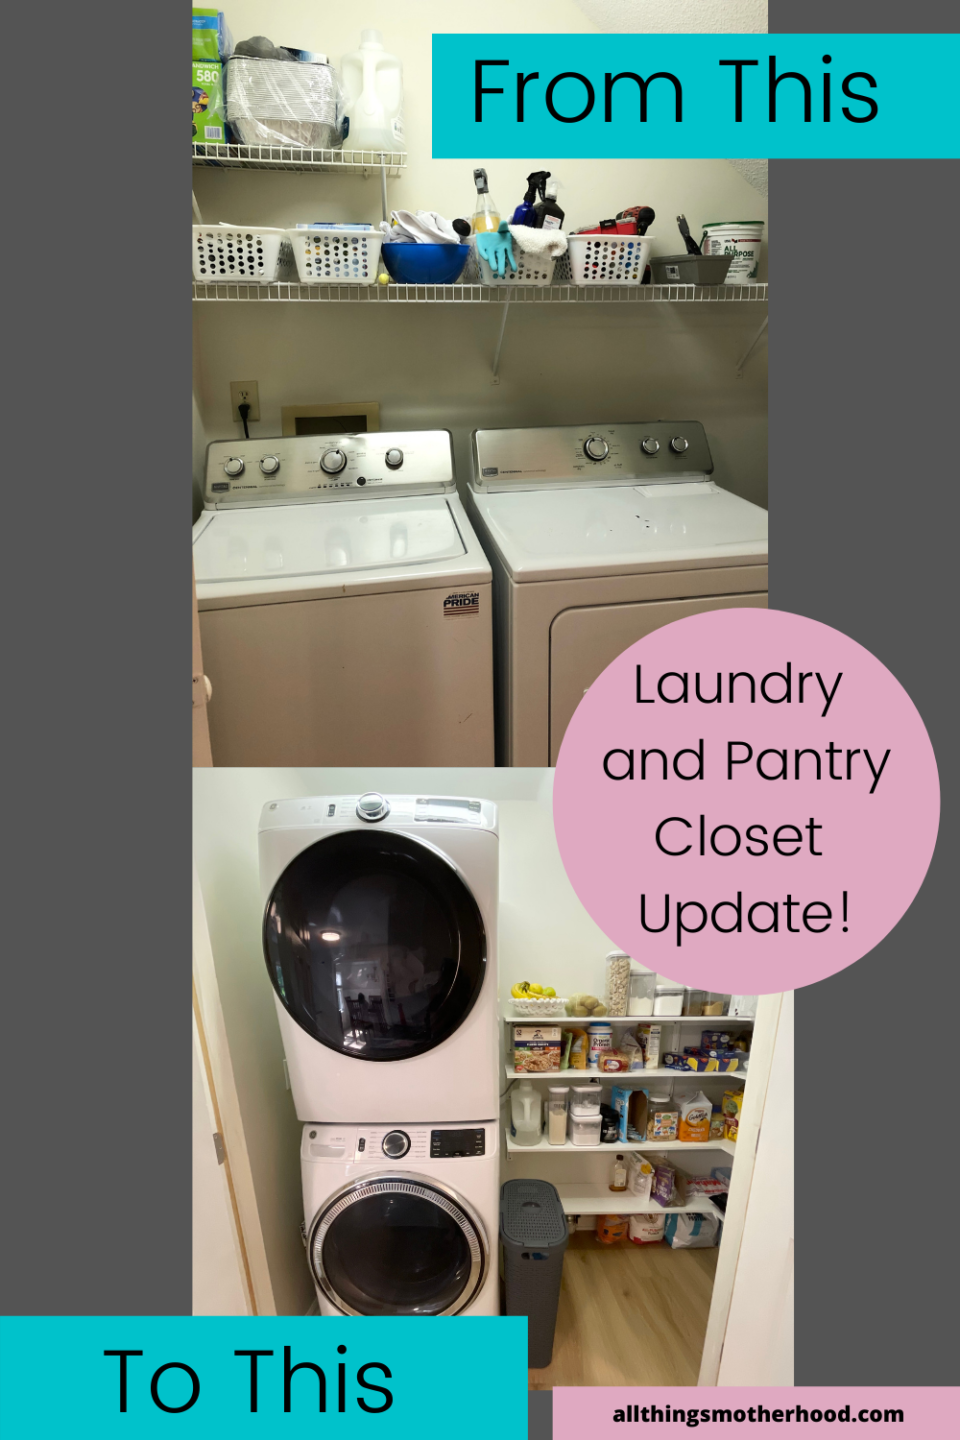 Laundry Closet and Pantry